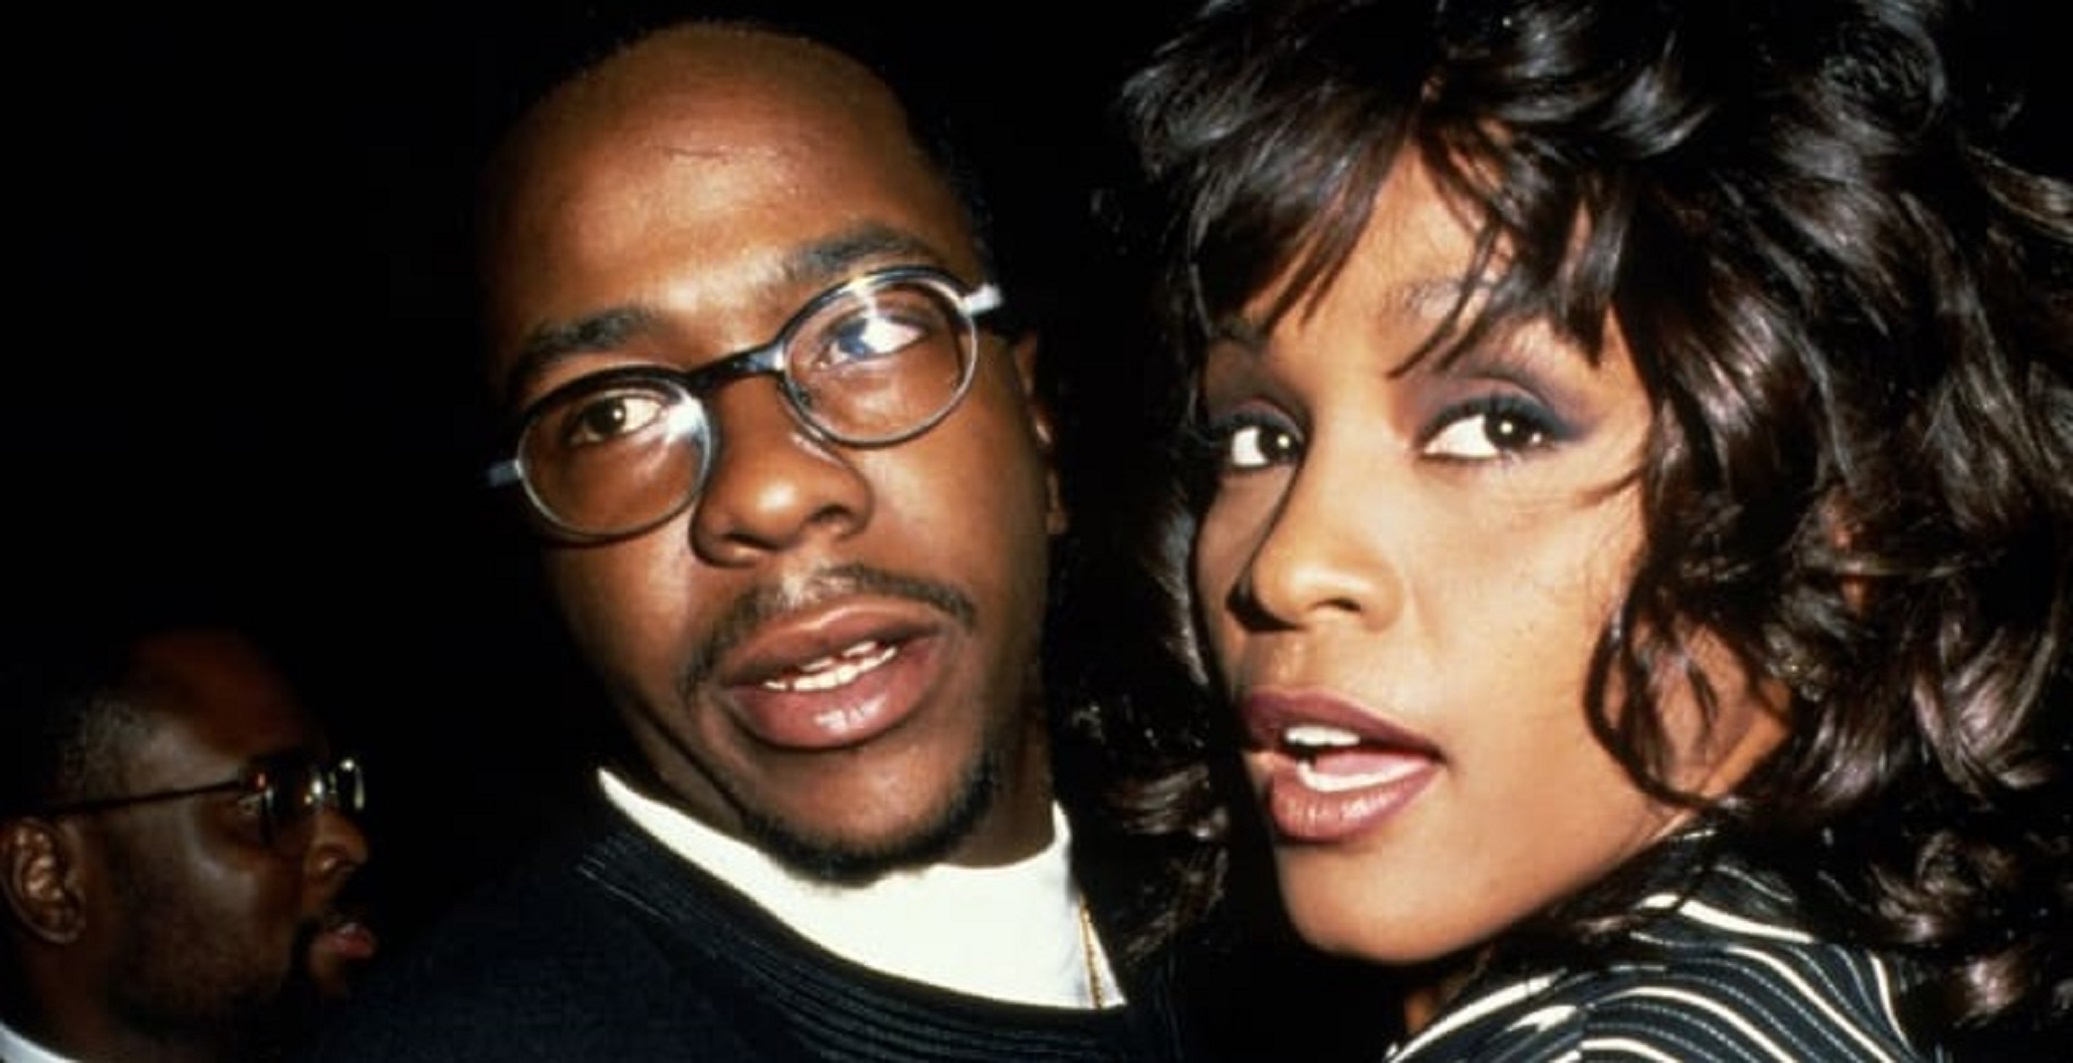 ‘Superstar’: Whitney Houston’s ‘Deeply Private’ Special, With Unseen Footage, Premiering on ABC